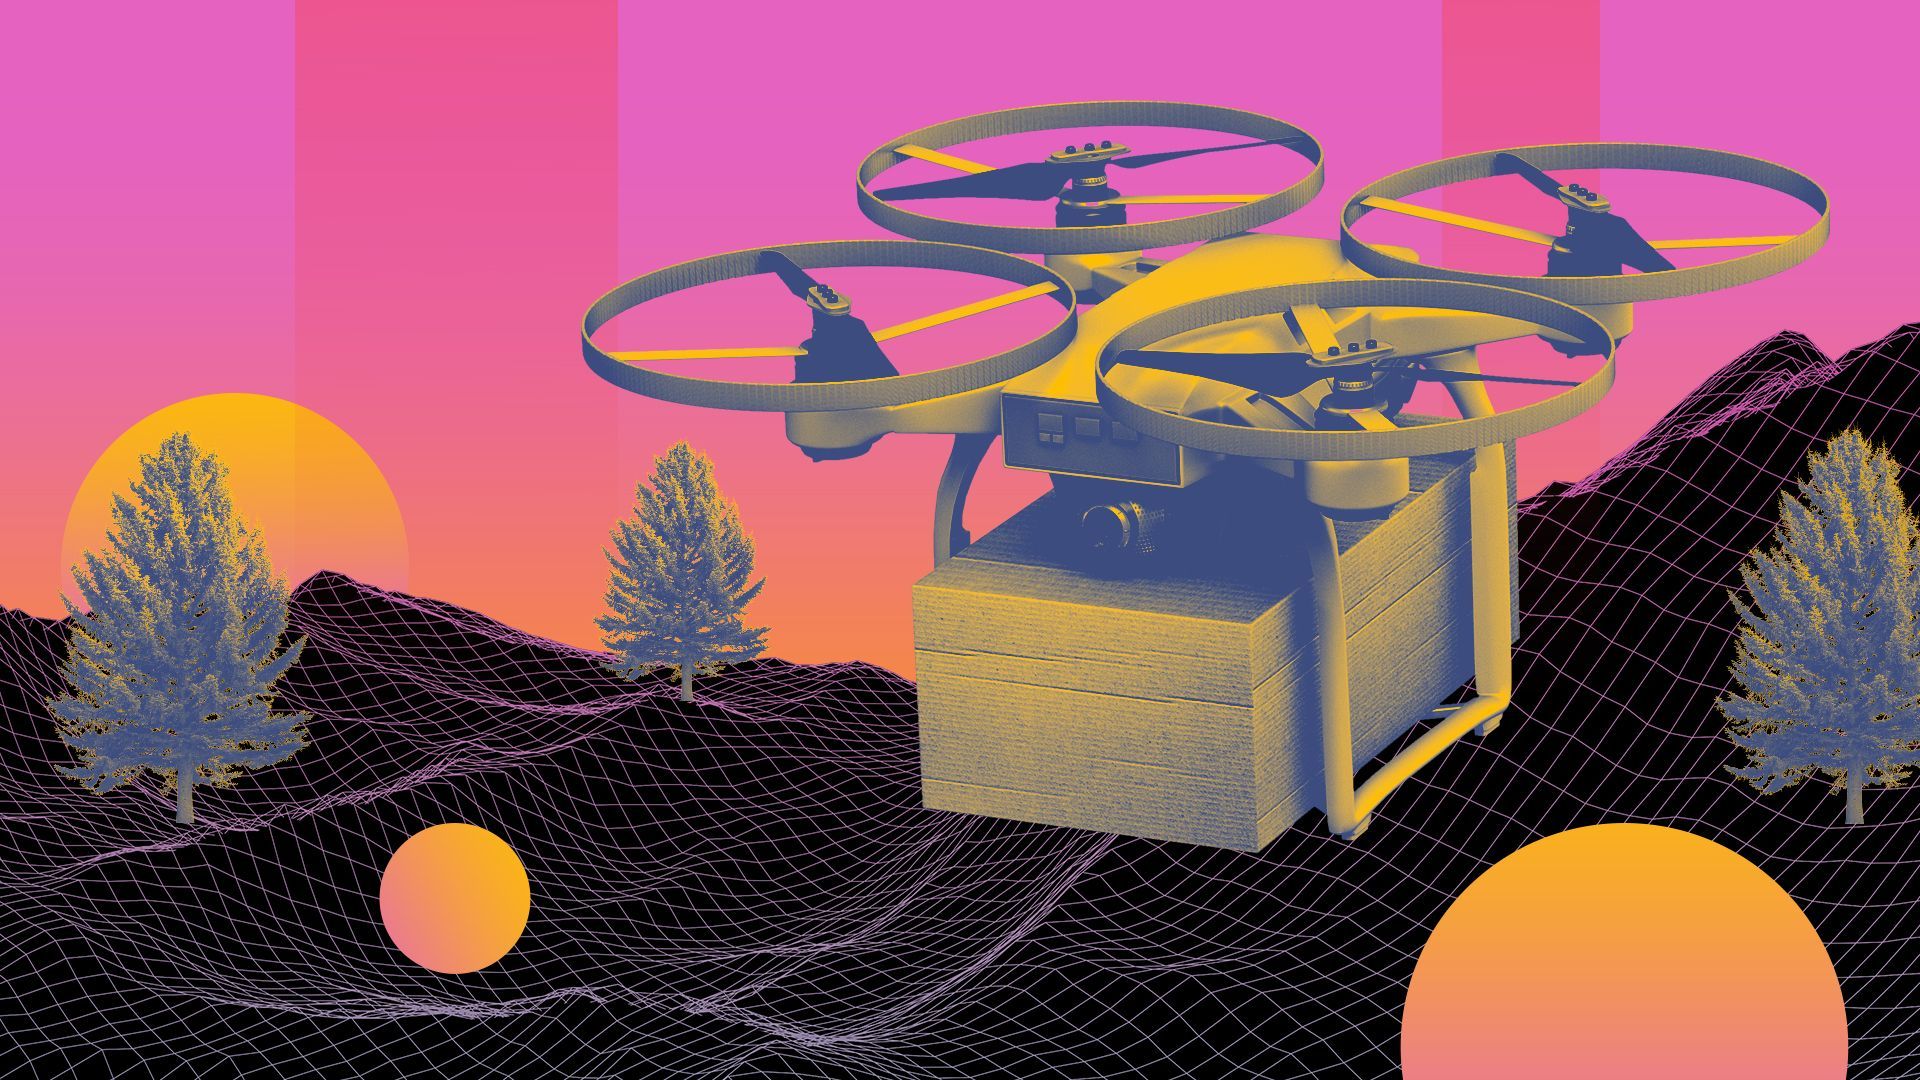 Illustration of a wireframe futuristic landscape with a drone flying above, and abstract shapes.